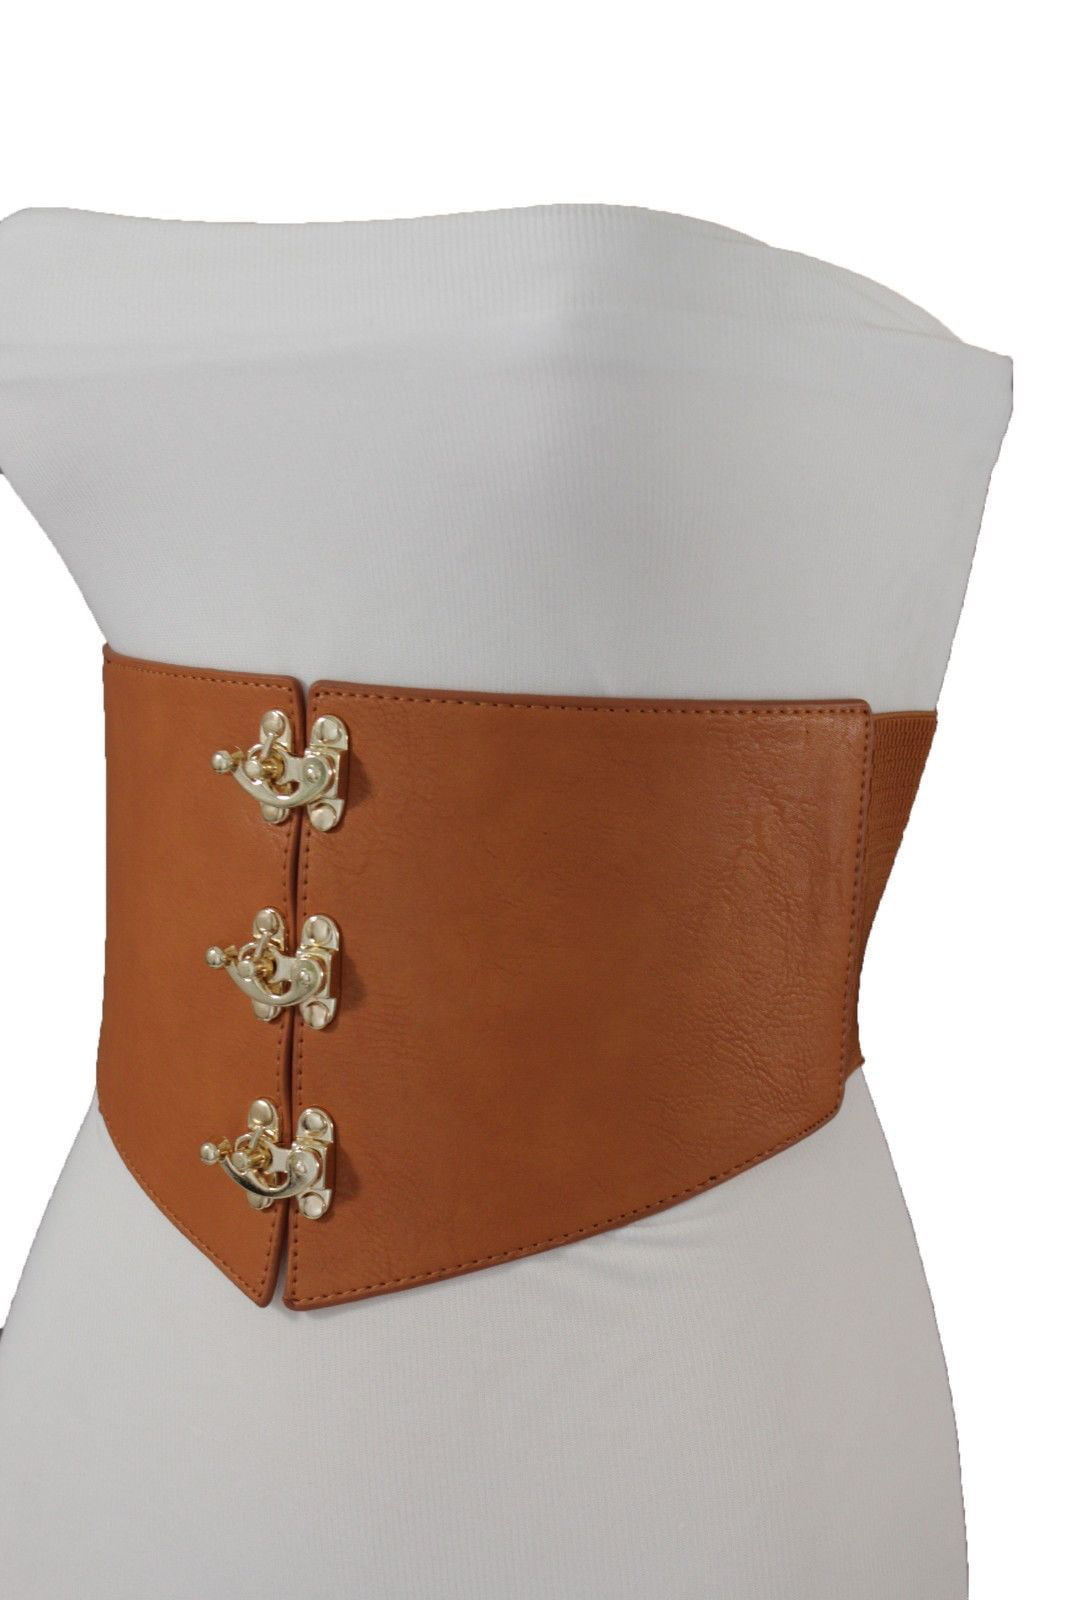 Women High Waist Hip Extra Wide Corset Belt White Faux Leather Elastic Band S M 